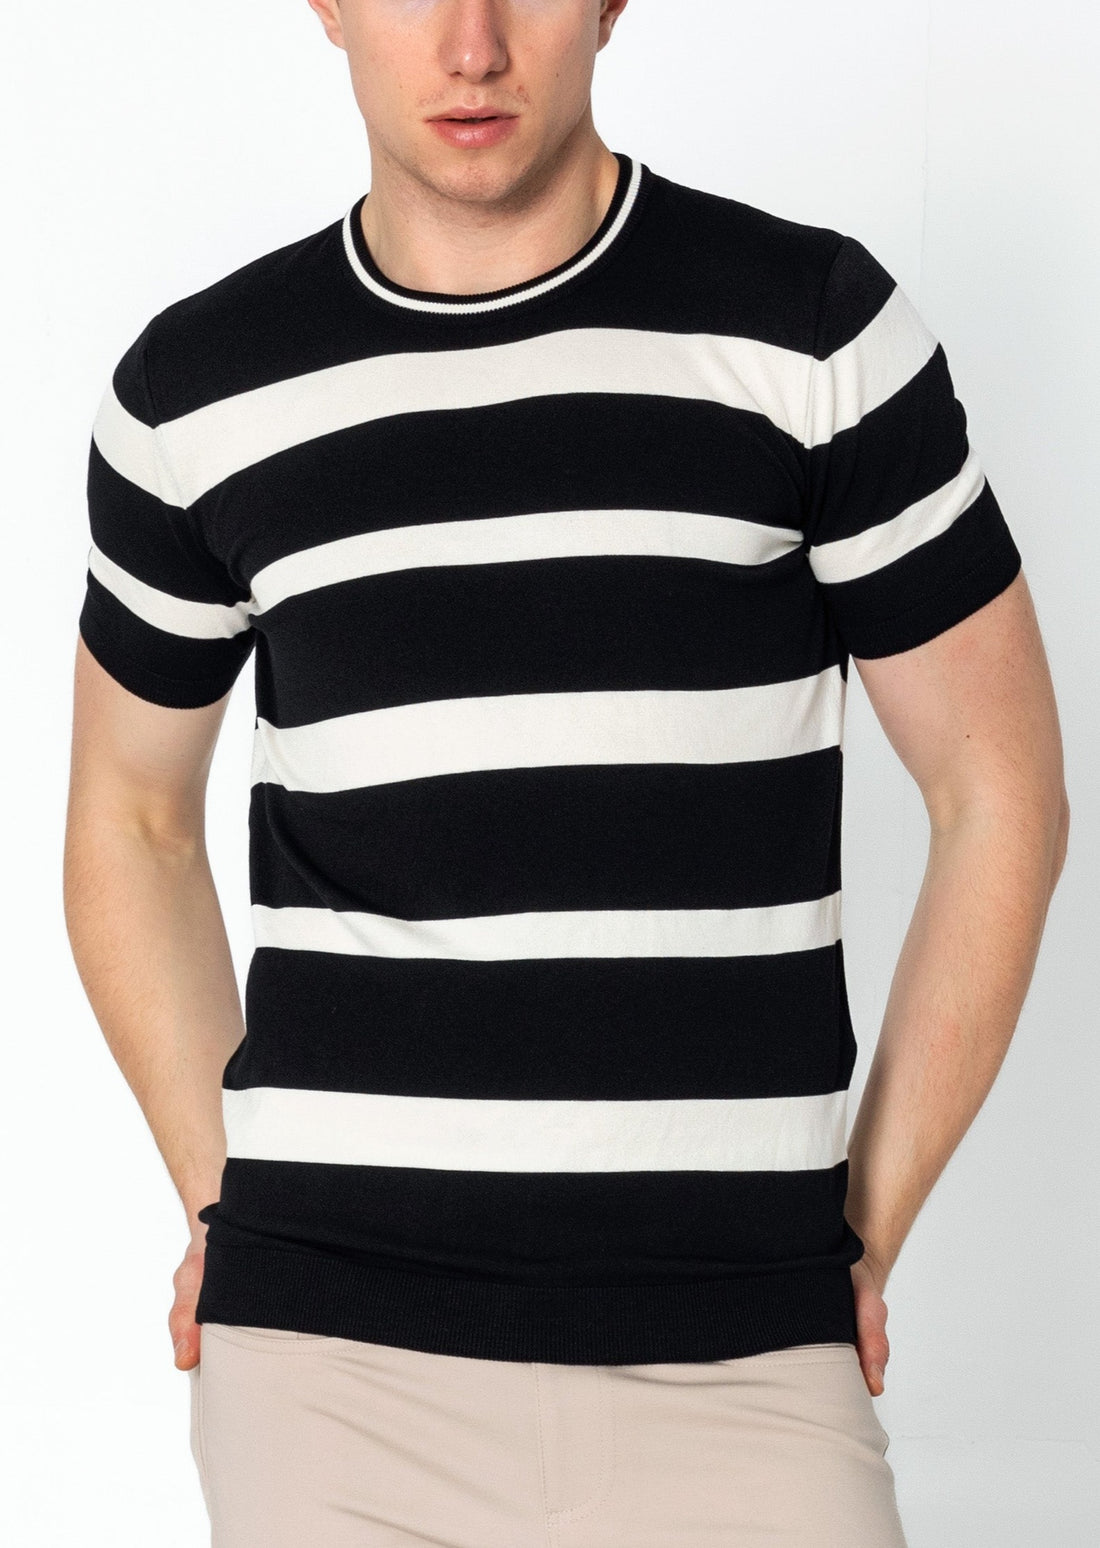 Crew-neck Knitted Striped Shirt - Black